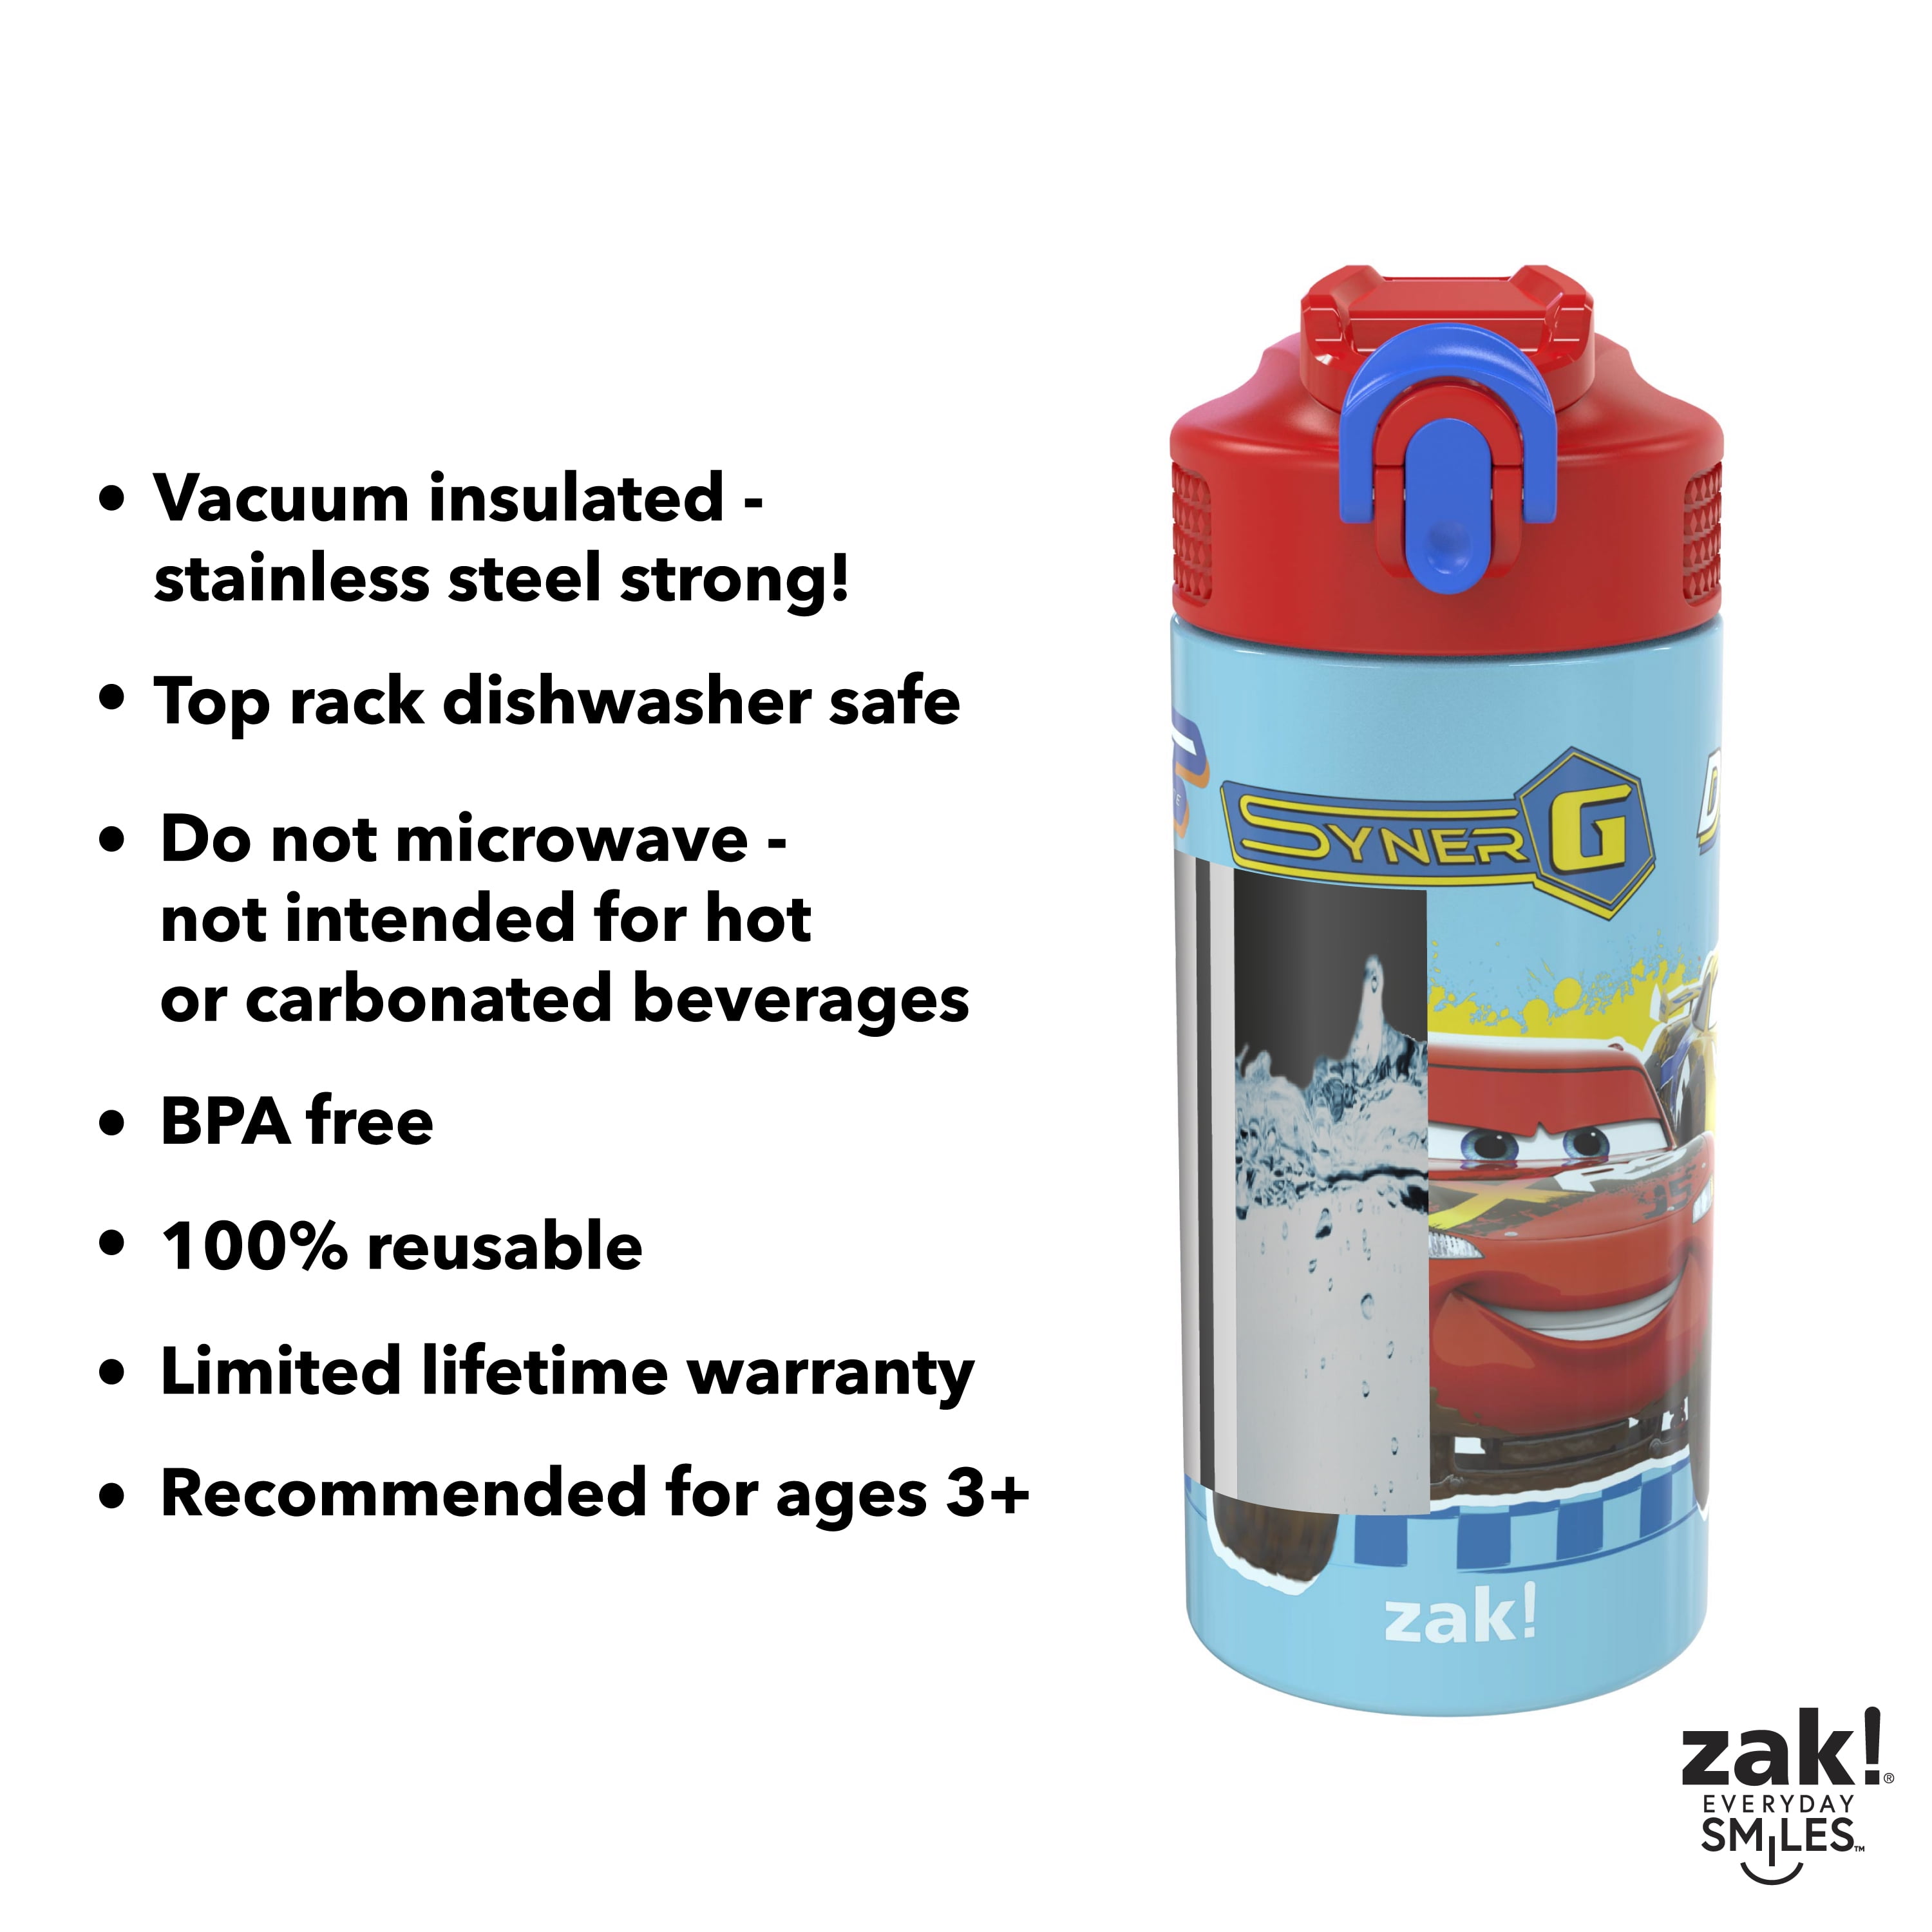 Zak Designs Disney Pixar Toy Story Insulated Kids Water Bottle 14 oz 18/8  Stainless Steel Thermal Vacuum with Flip-Up Straw Spout and Locking Spout